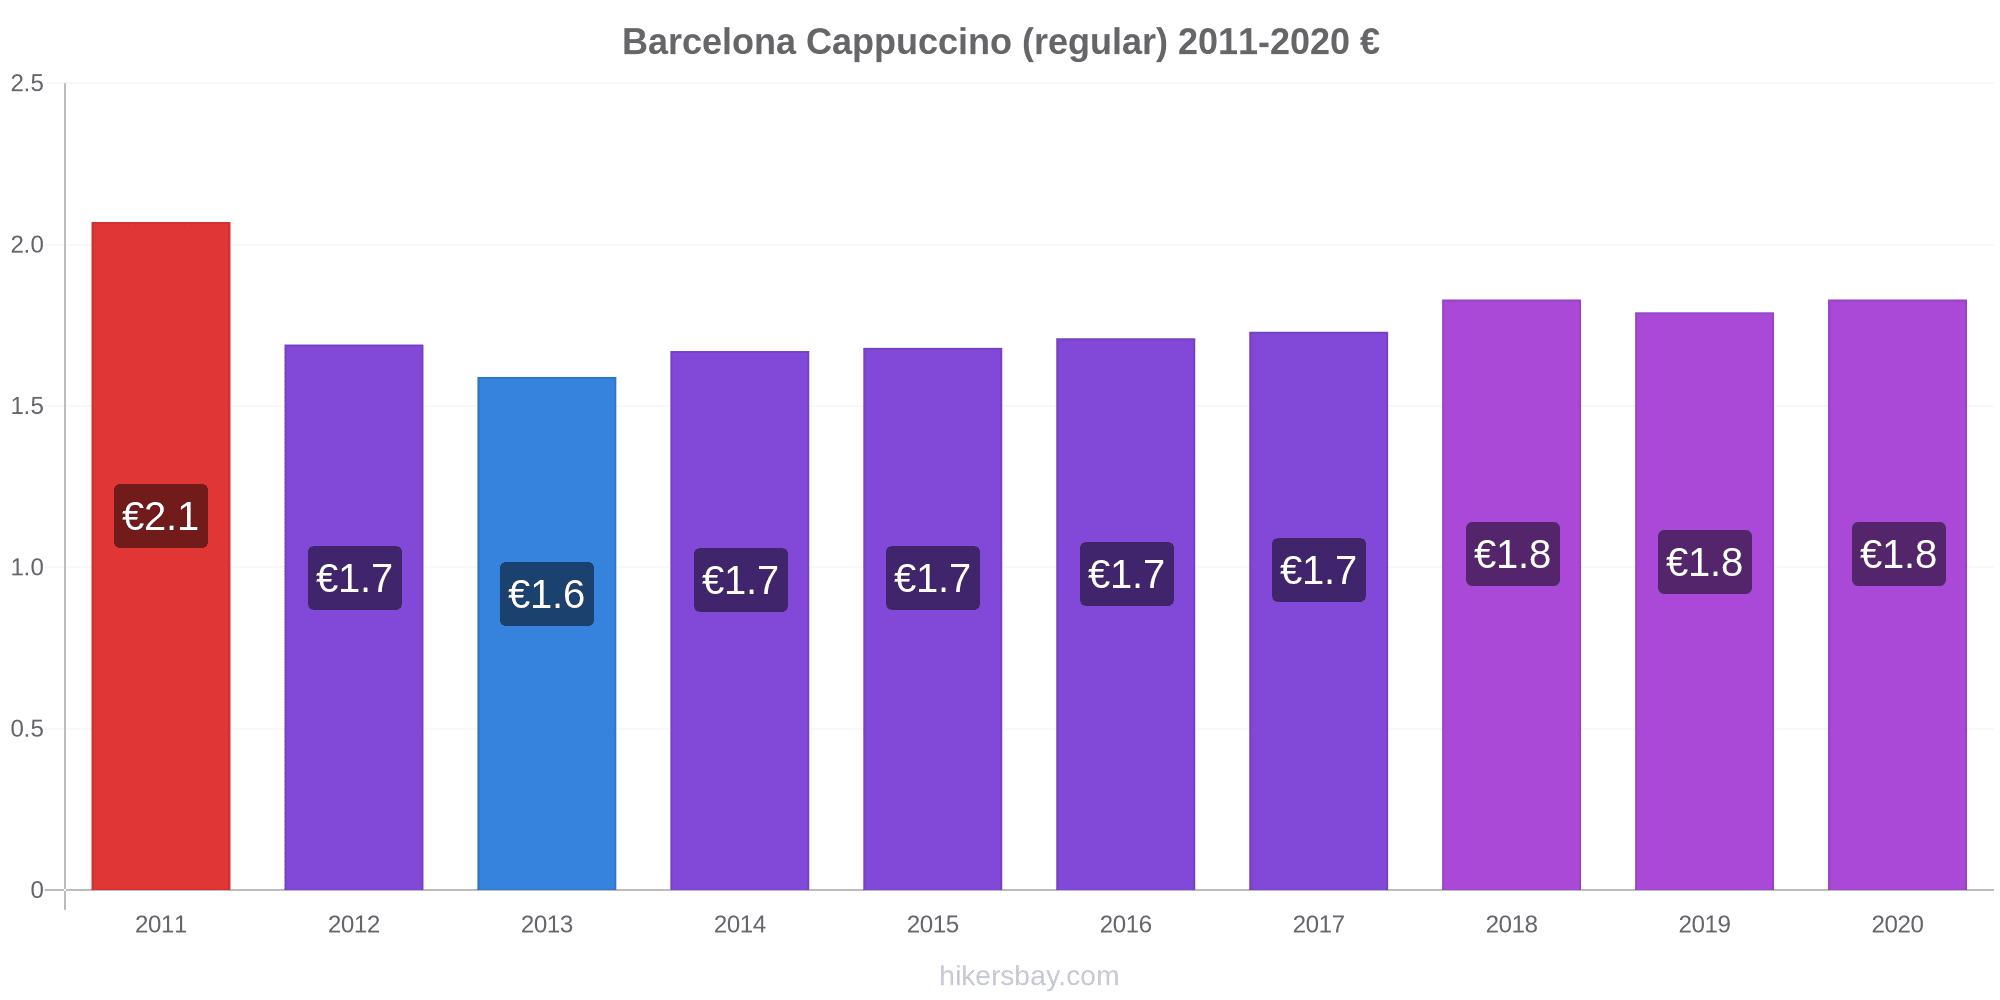 Prices in Barcelona August 2021 prices in restaurants, prices of food